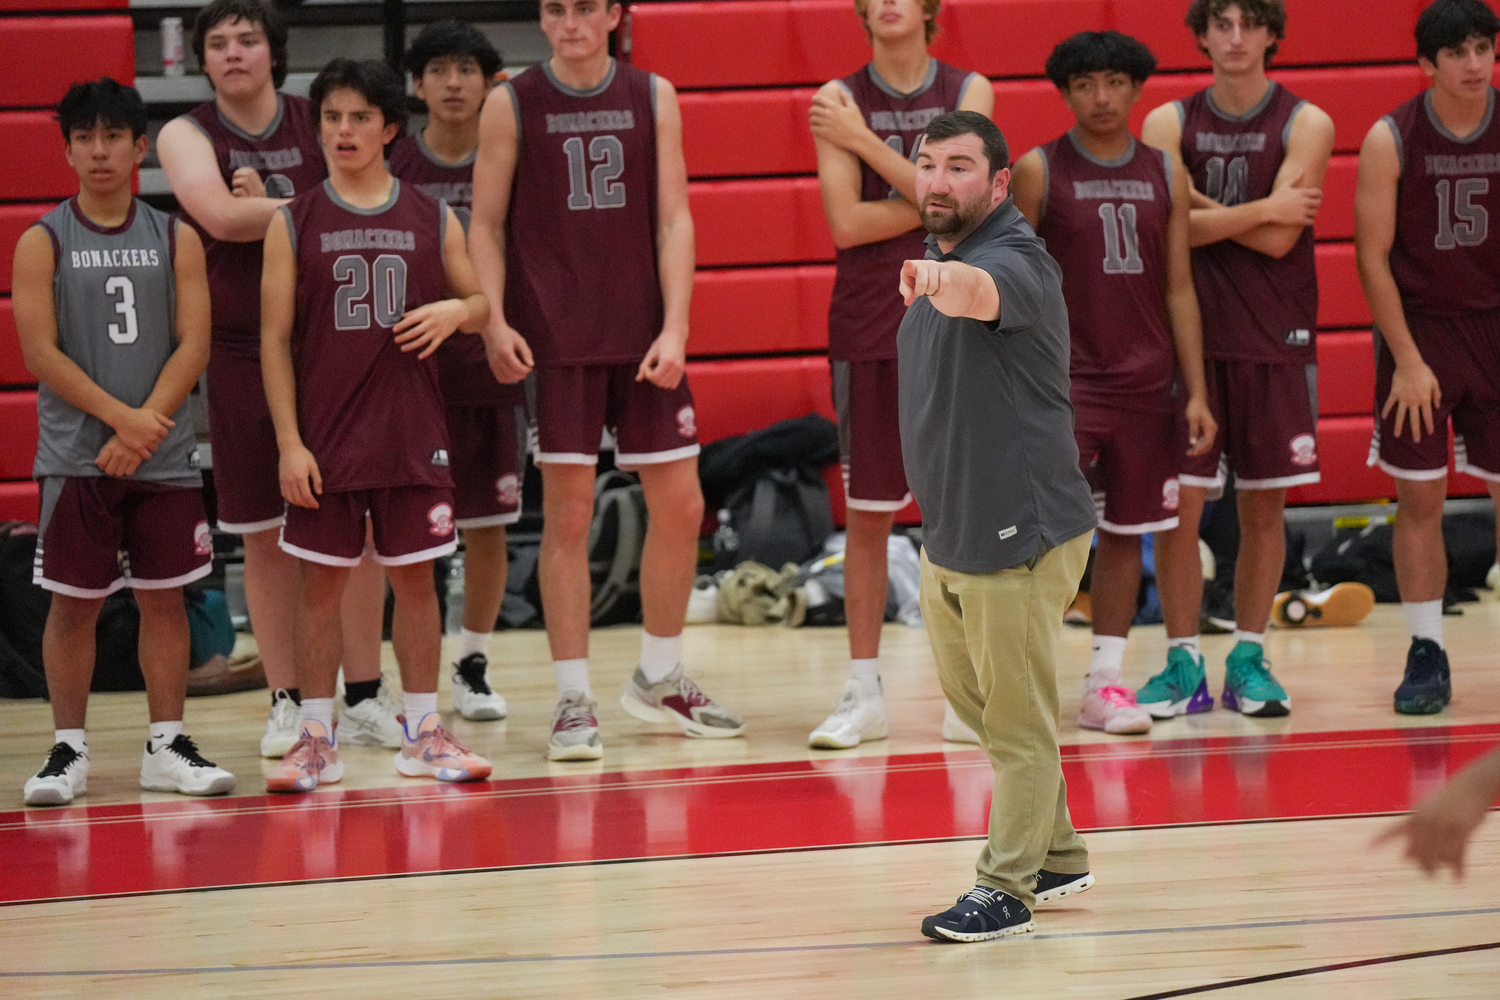 East Hampton assistant coach Andrew Rodriguez directs a player on the court.   RON ESPOSITO